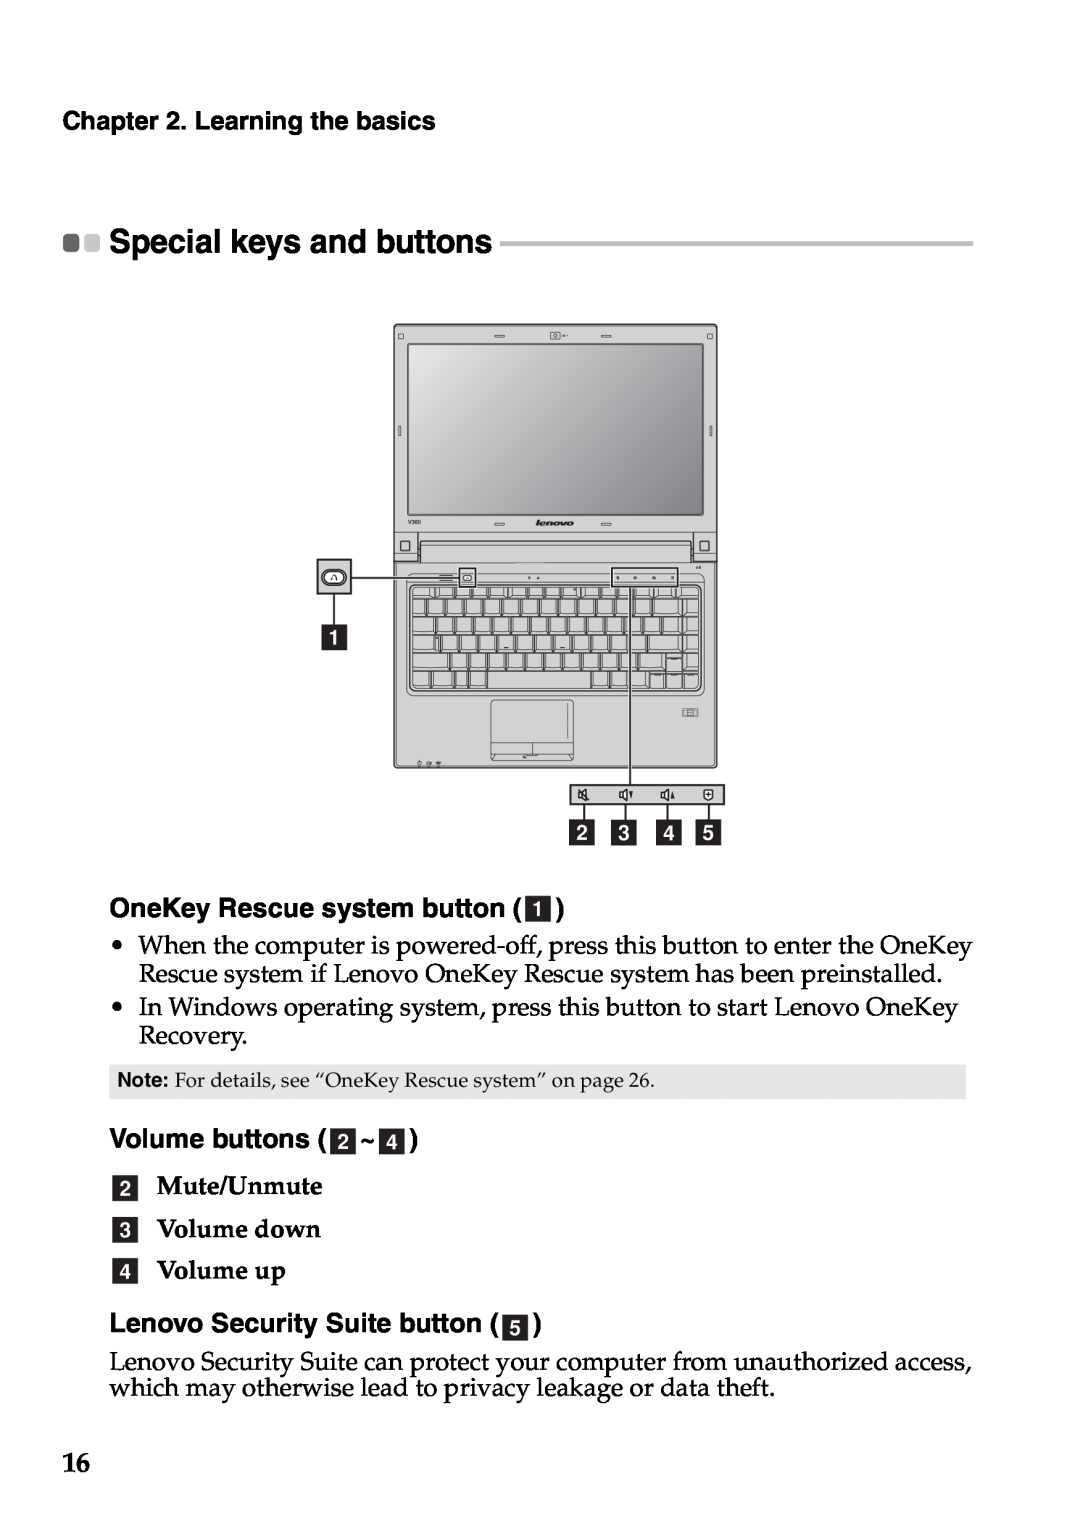 Lenovo V360 manual OneKey Rescue system button a, Volume buttons b~d, Lenovo Security Suite button e, Learning the basics 